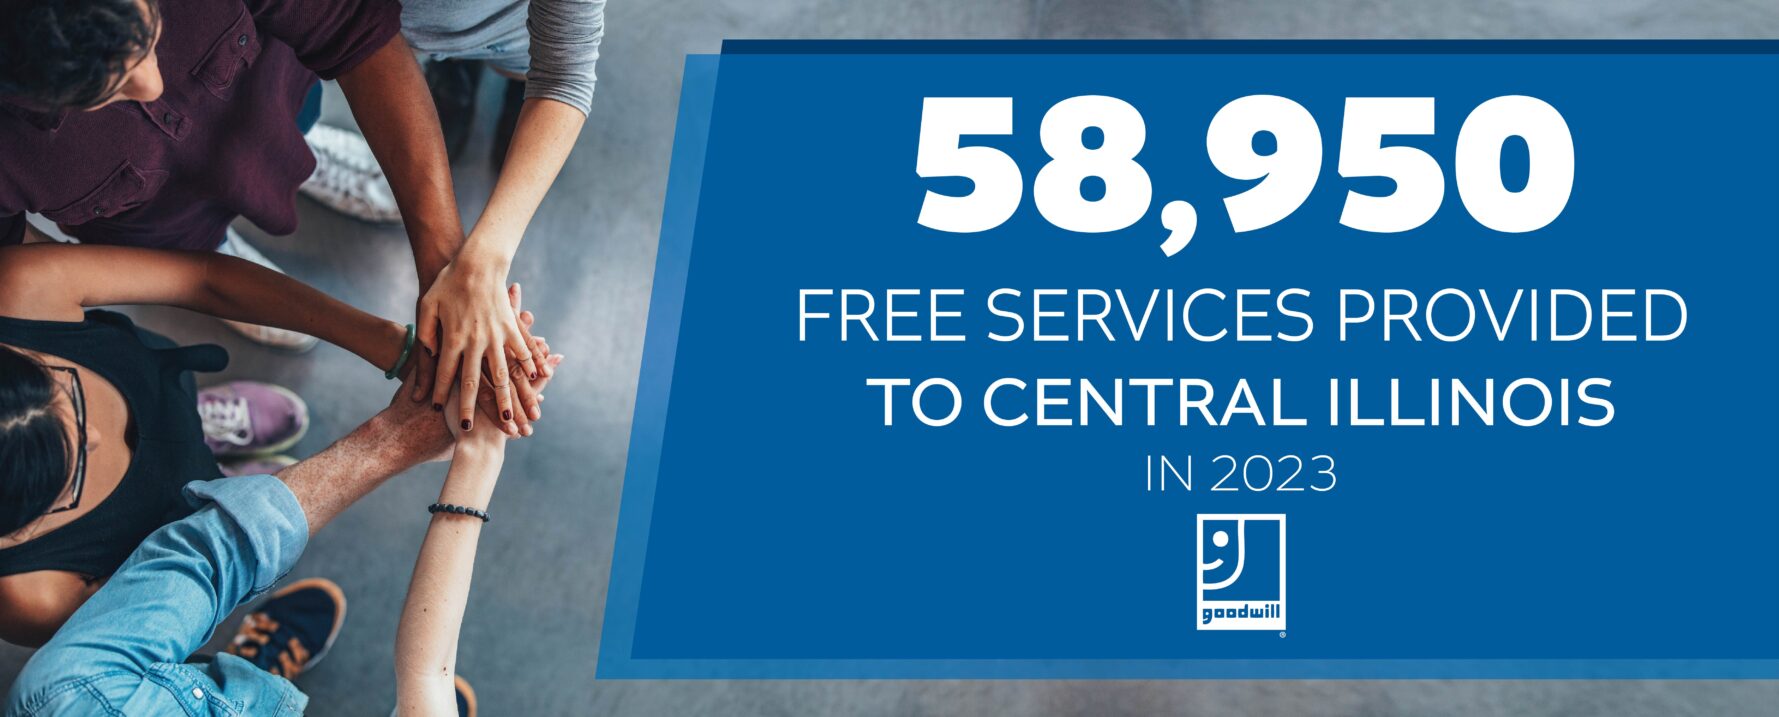 2023 Free Services Total